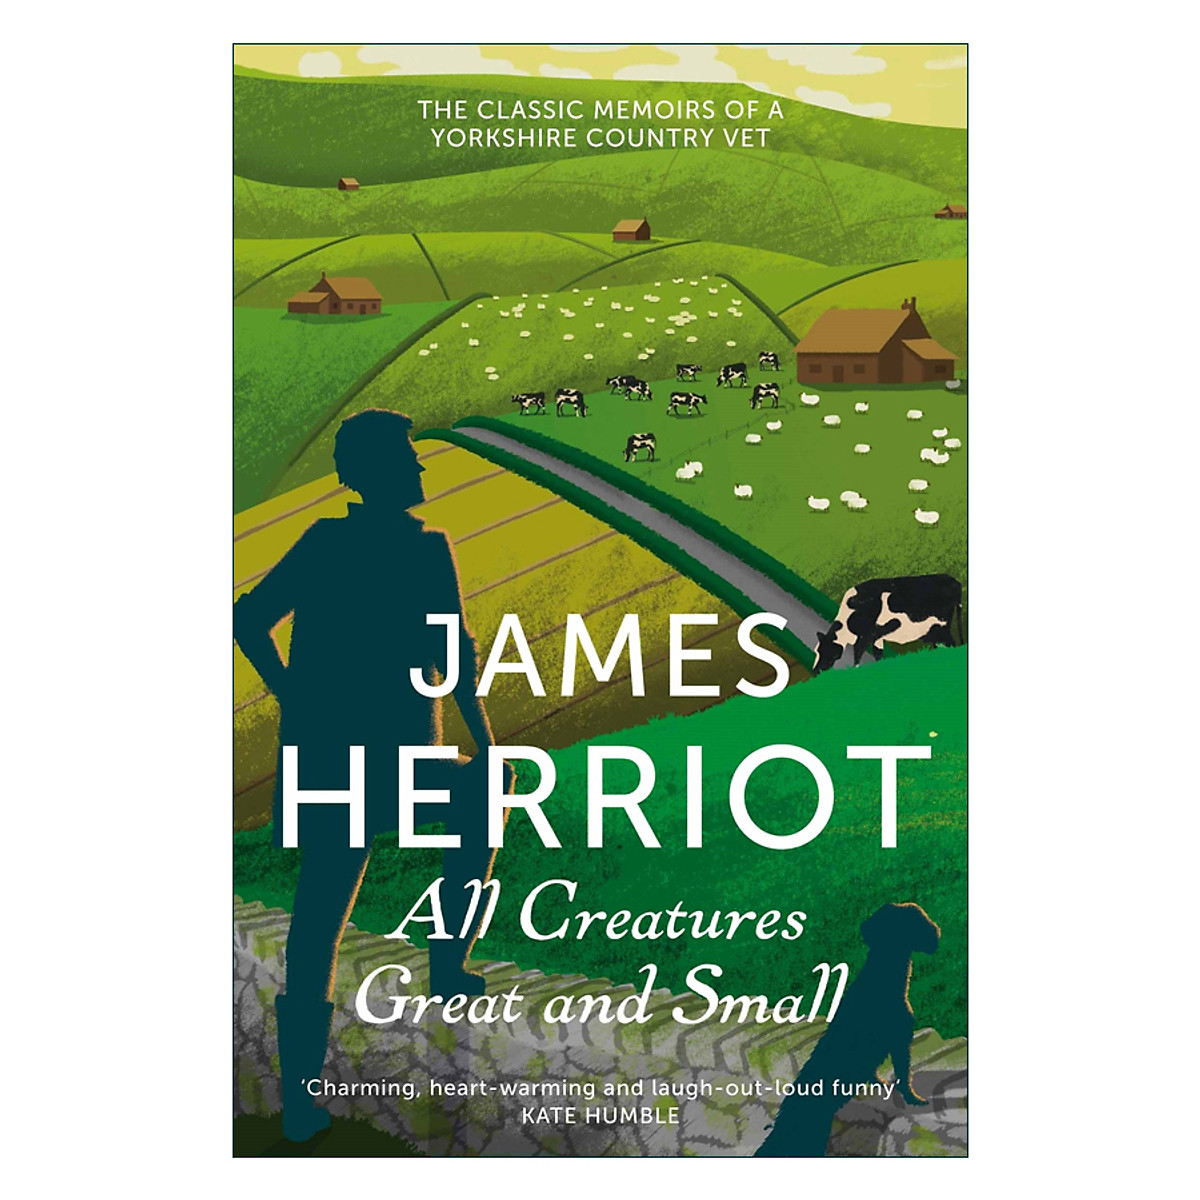 All Creatures Great and Small: The Classic Memoirs of a Yorkshire Country Vet (Paperback)